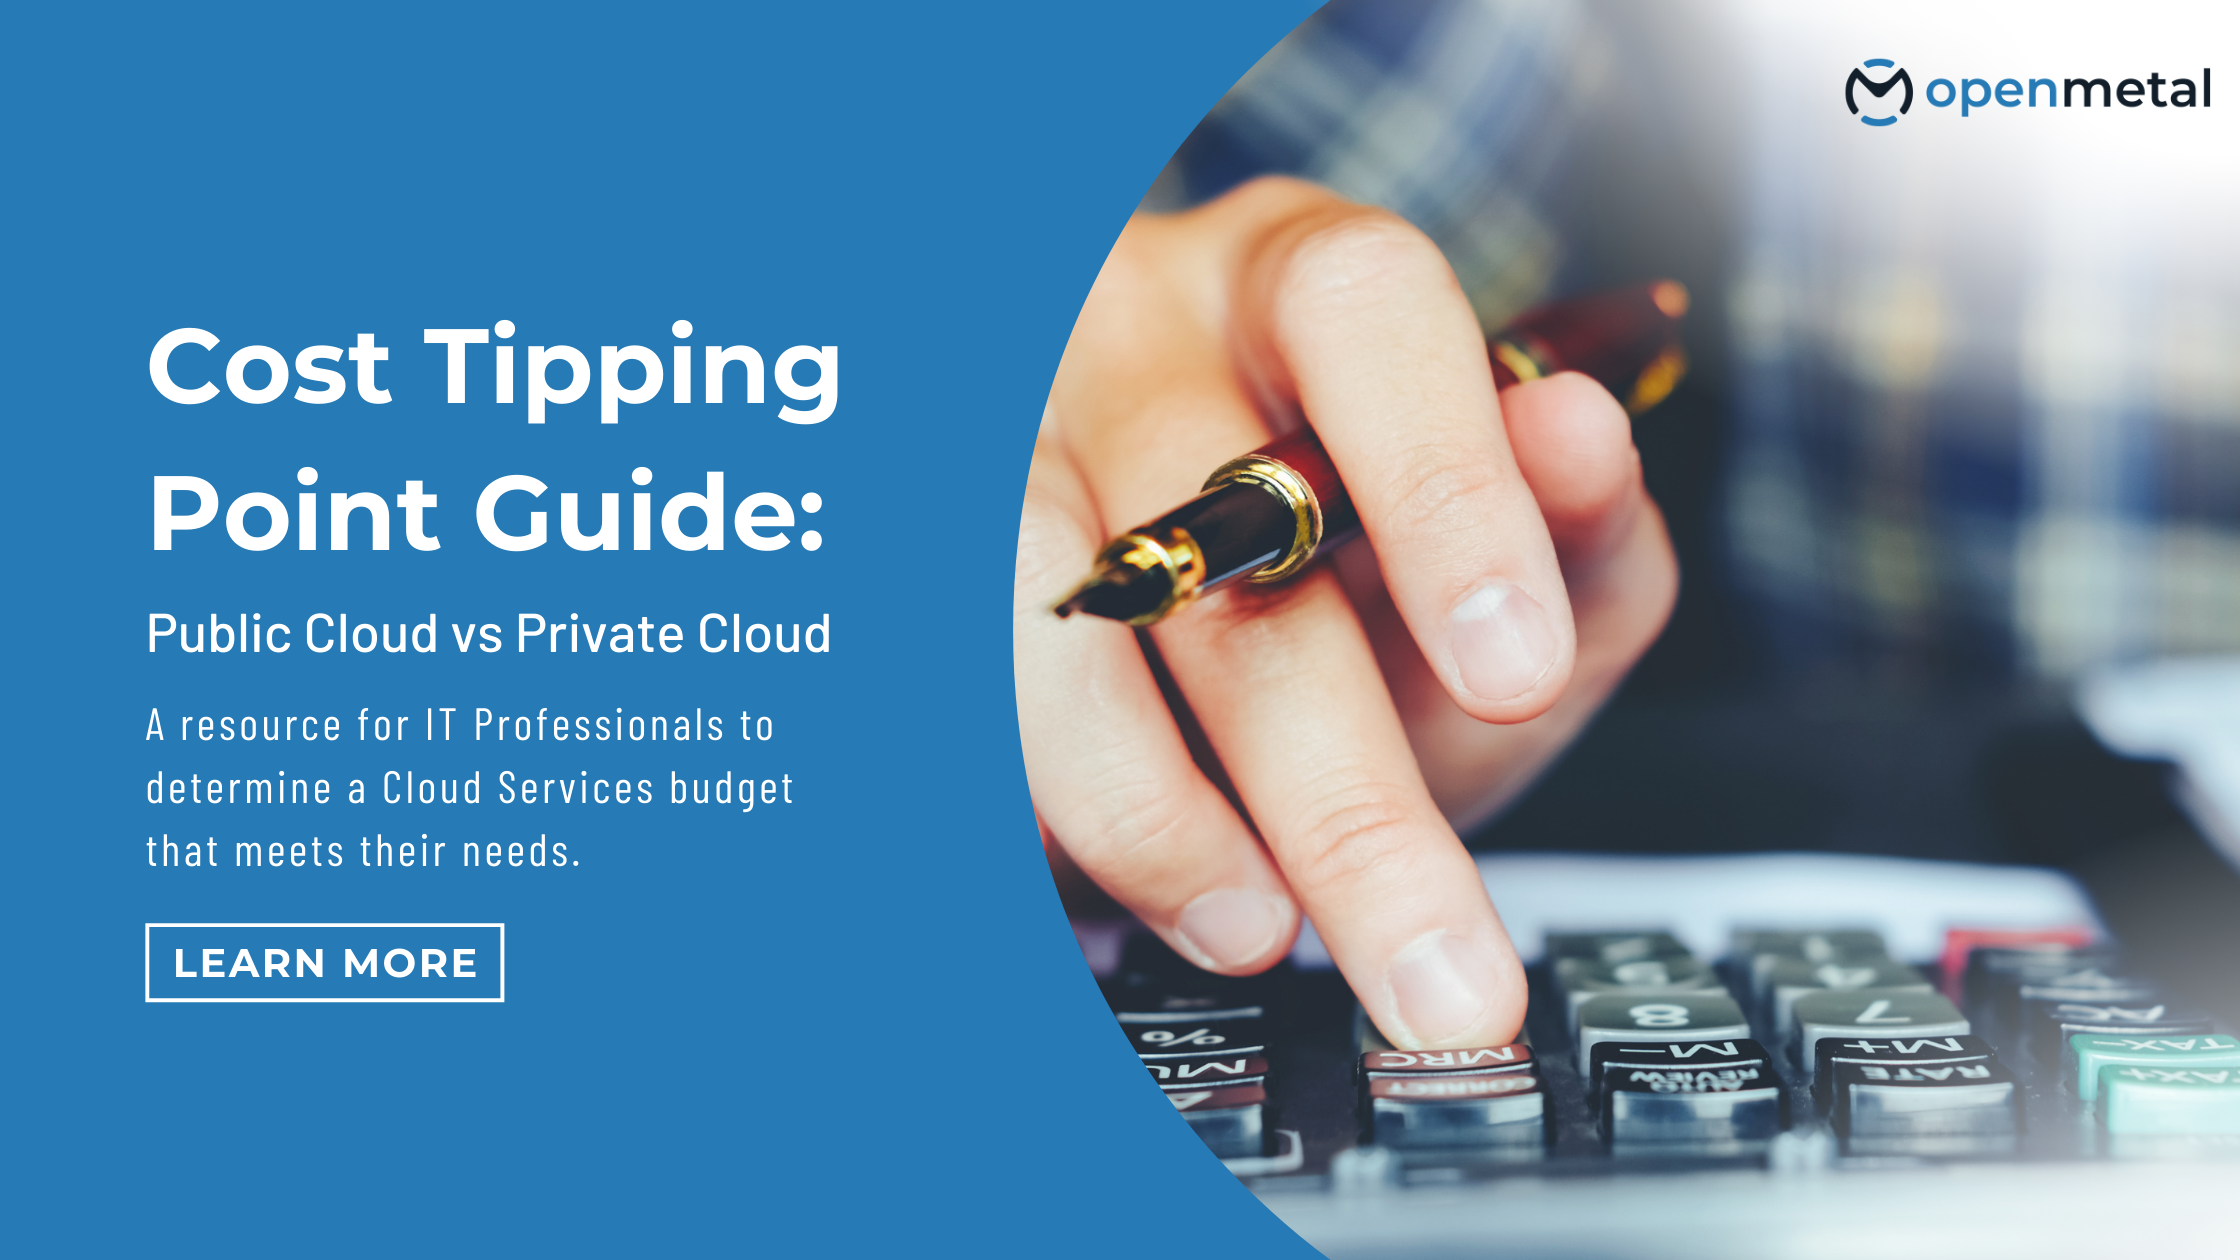 A Cost Tipping Point Guide for IT Professionals: Public vs Private Cloud